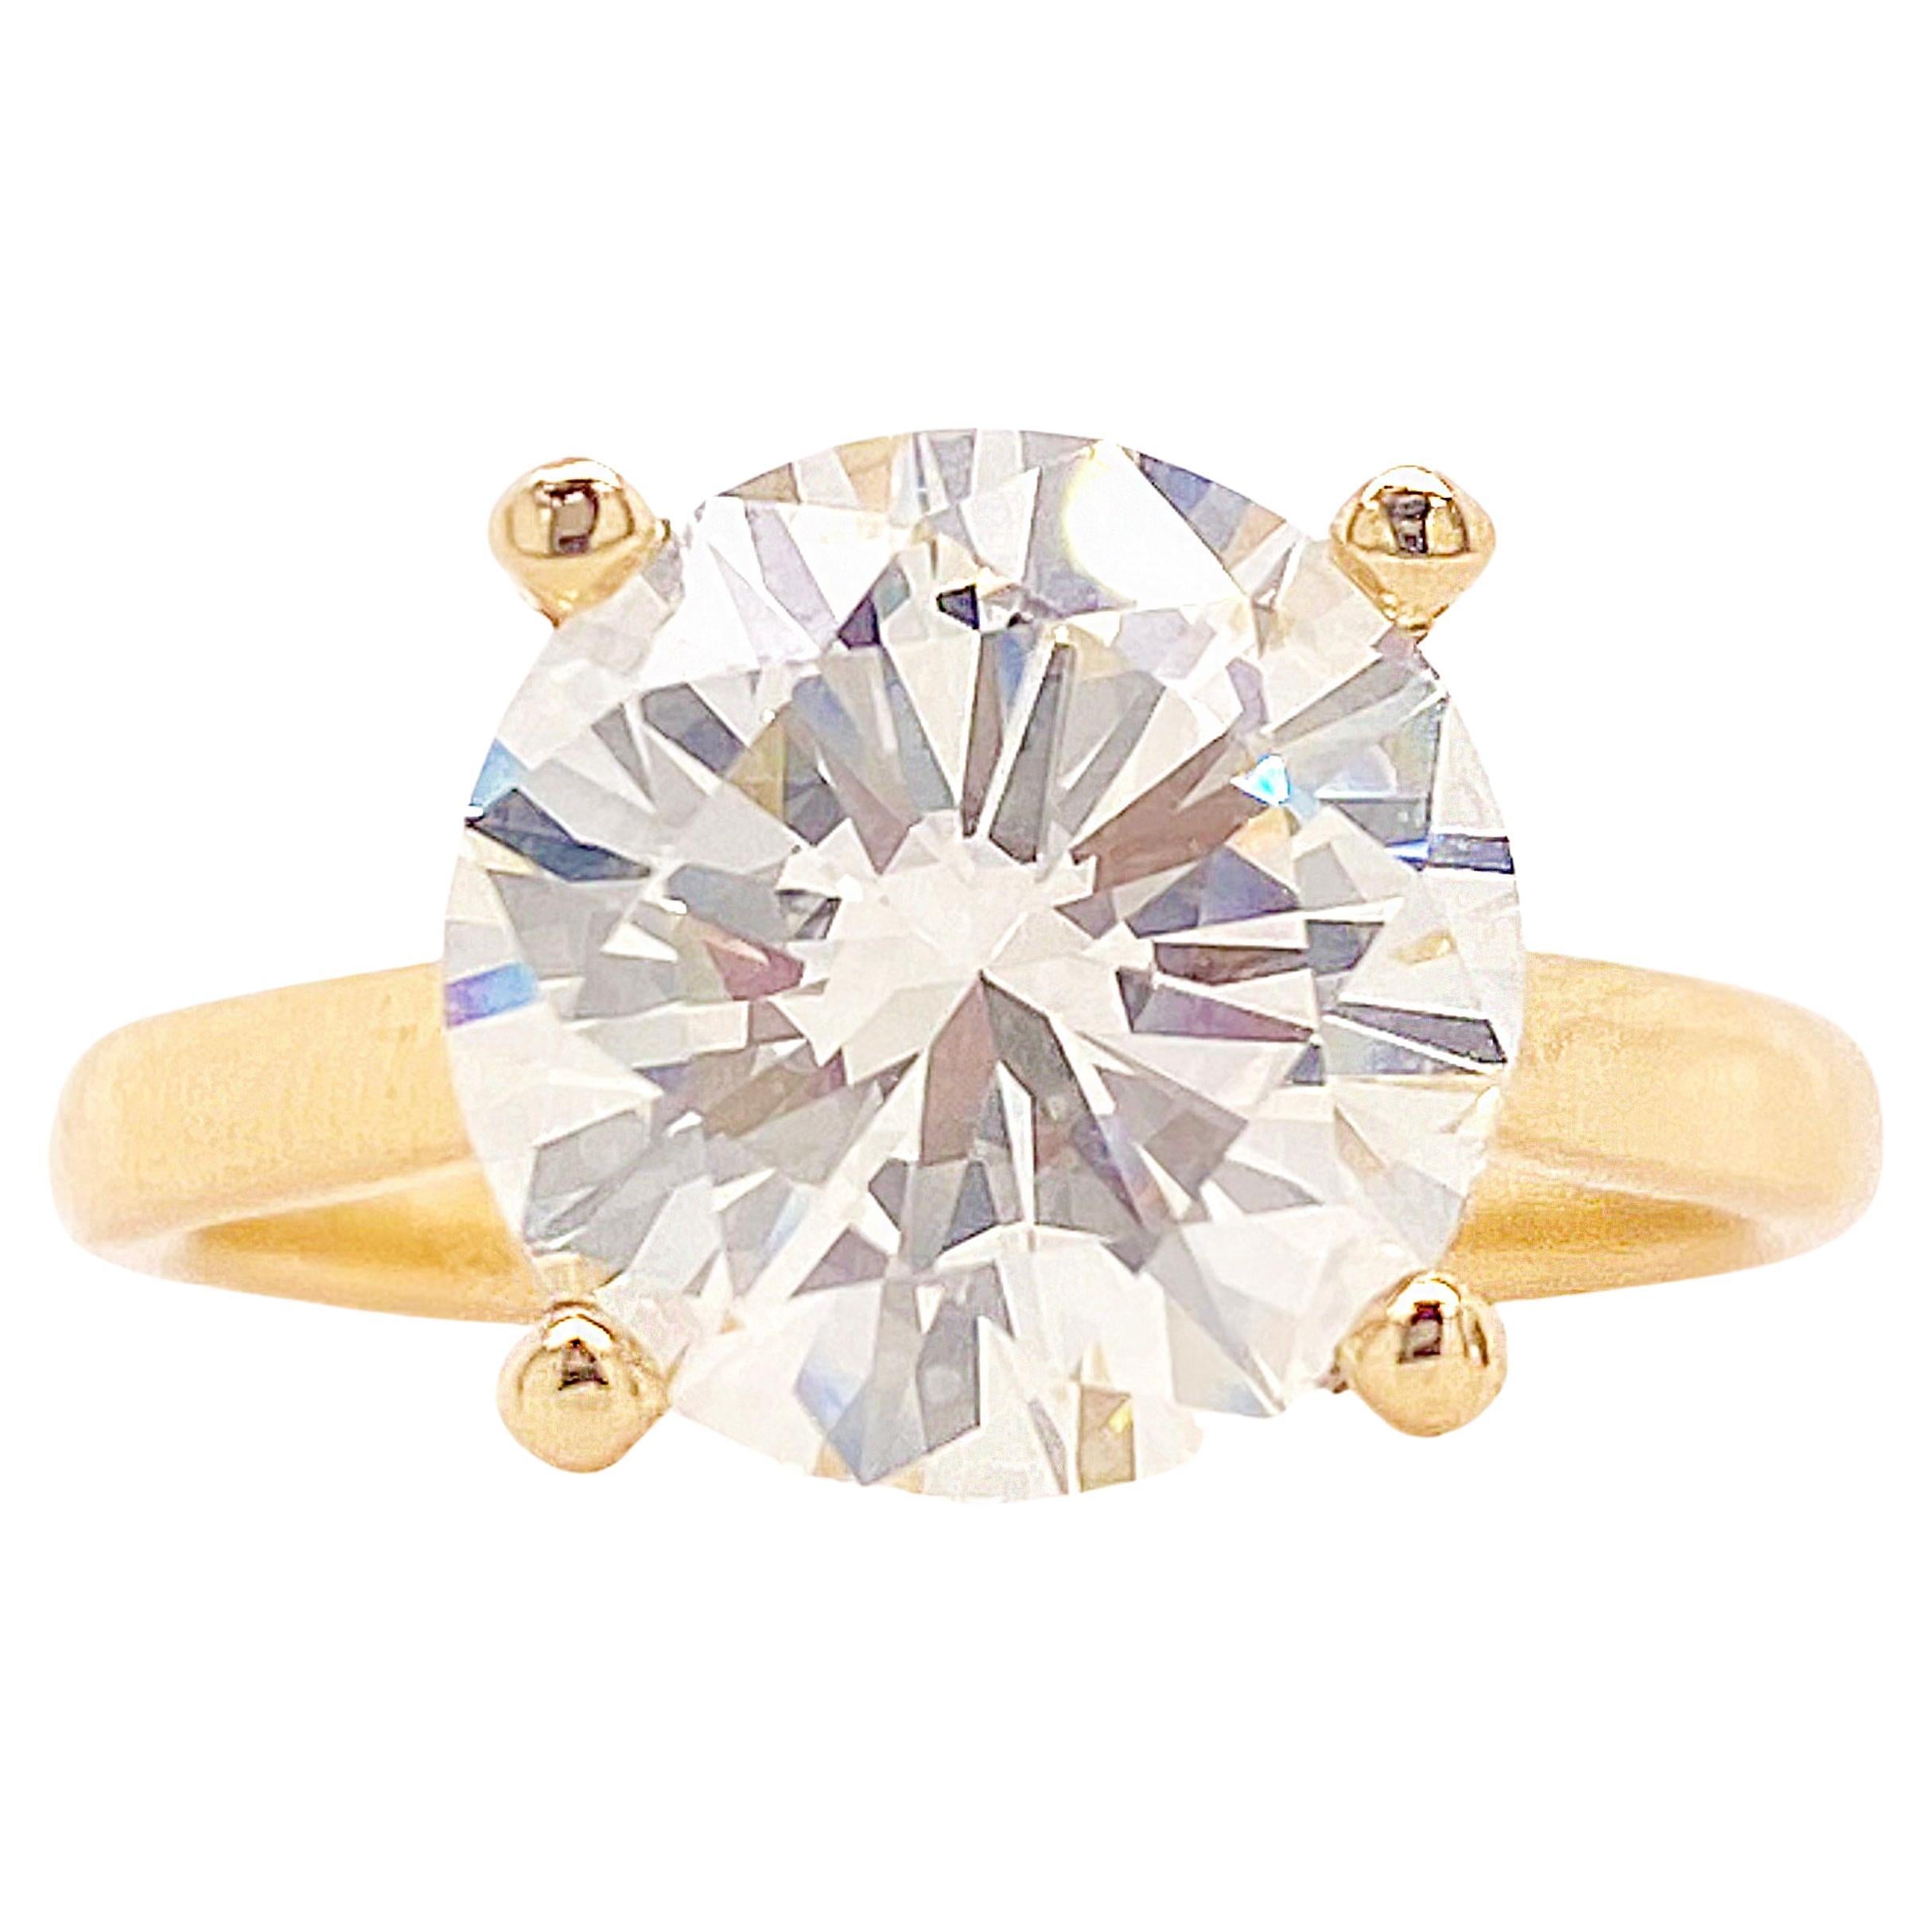 4 Carat Round Solitare Diamond Engagement Ring GIA Certified Natural Diamond For Sale